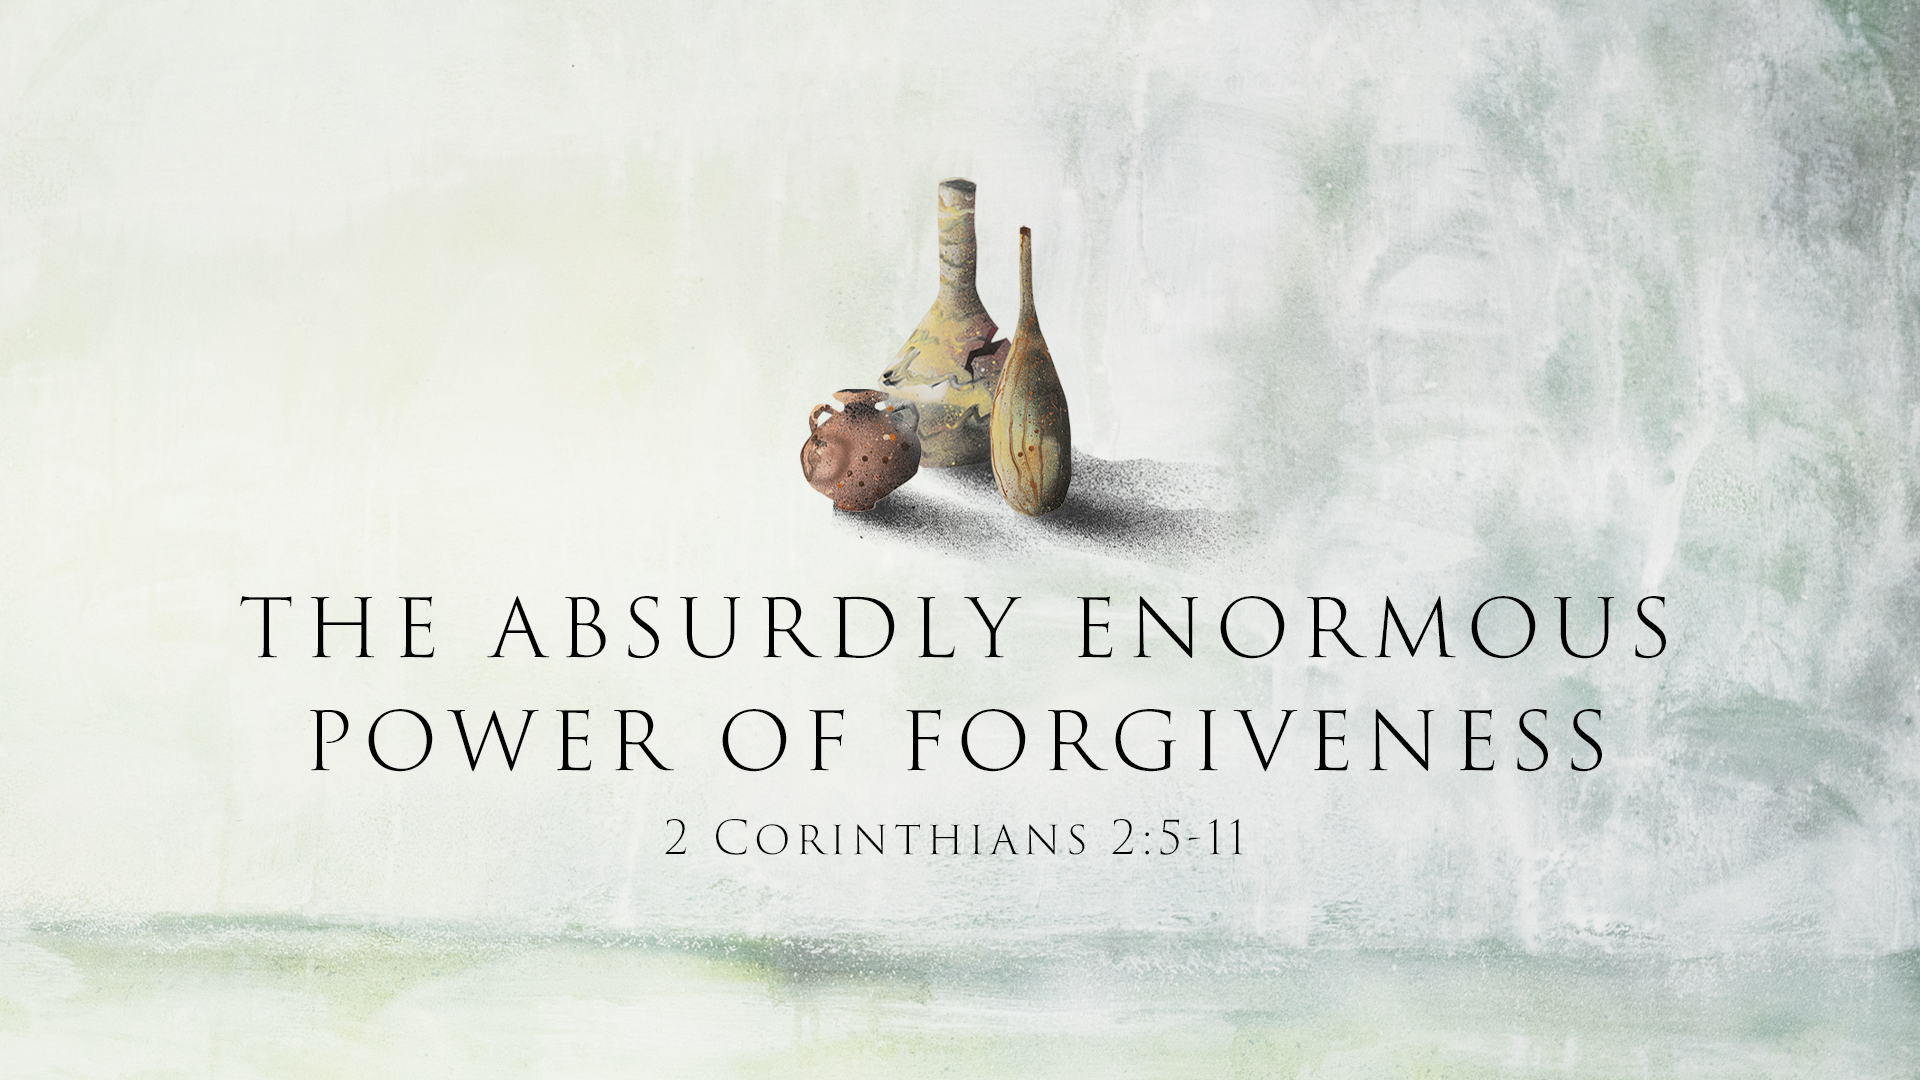 The Absurdly Enormous Power of Forgiveness